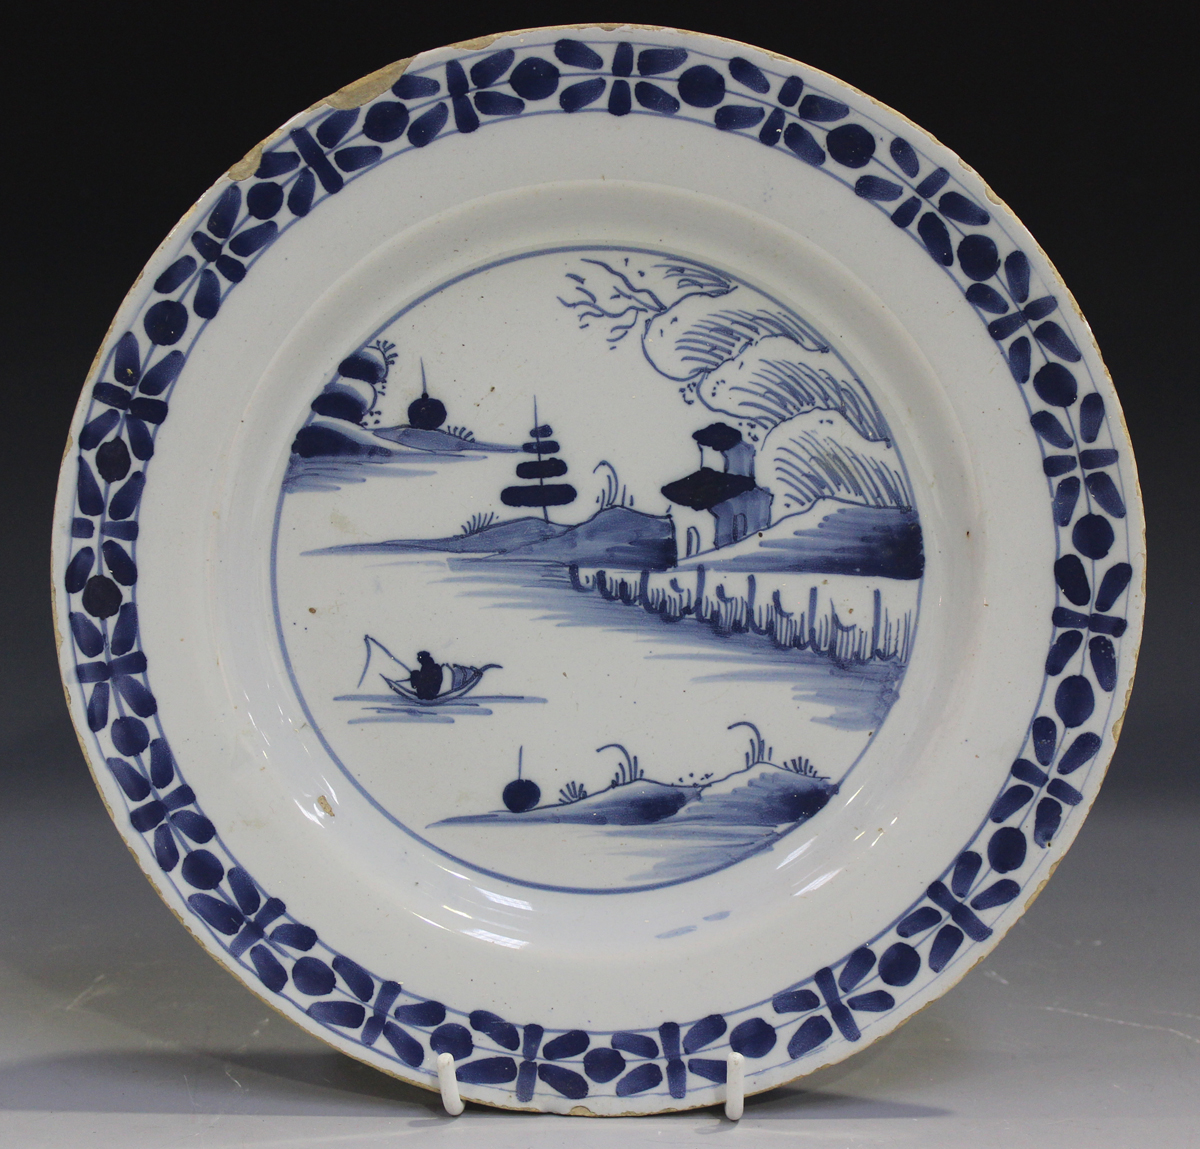 Three English Delft plates, mid-18th century, each painted in blue with a chinoiserie landscape - Image 5 of 7